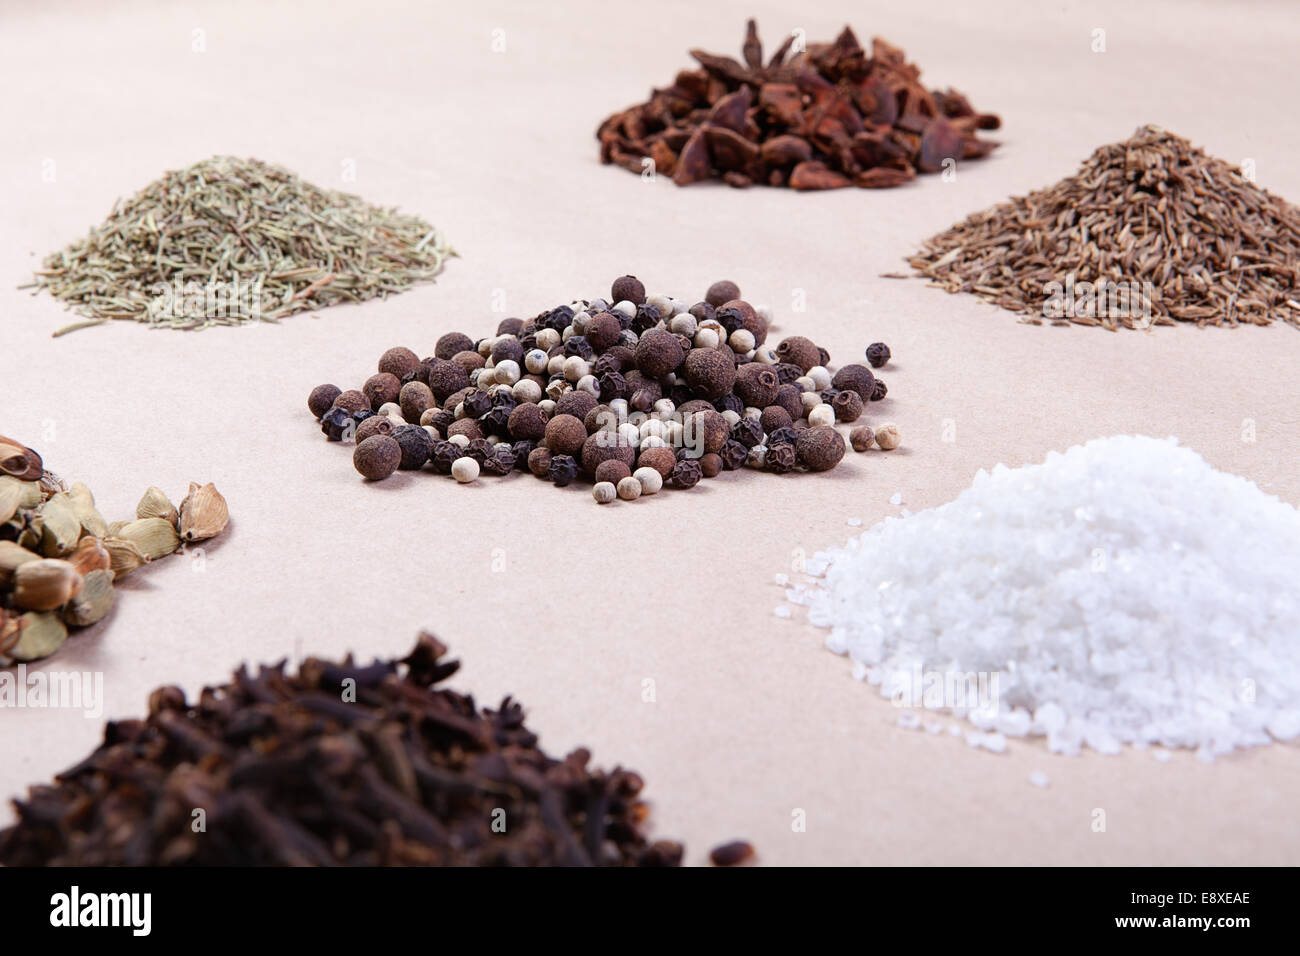 Large spice selection, isolated over paper background Stock Photo